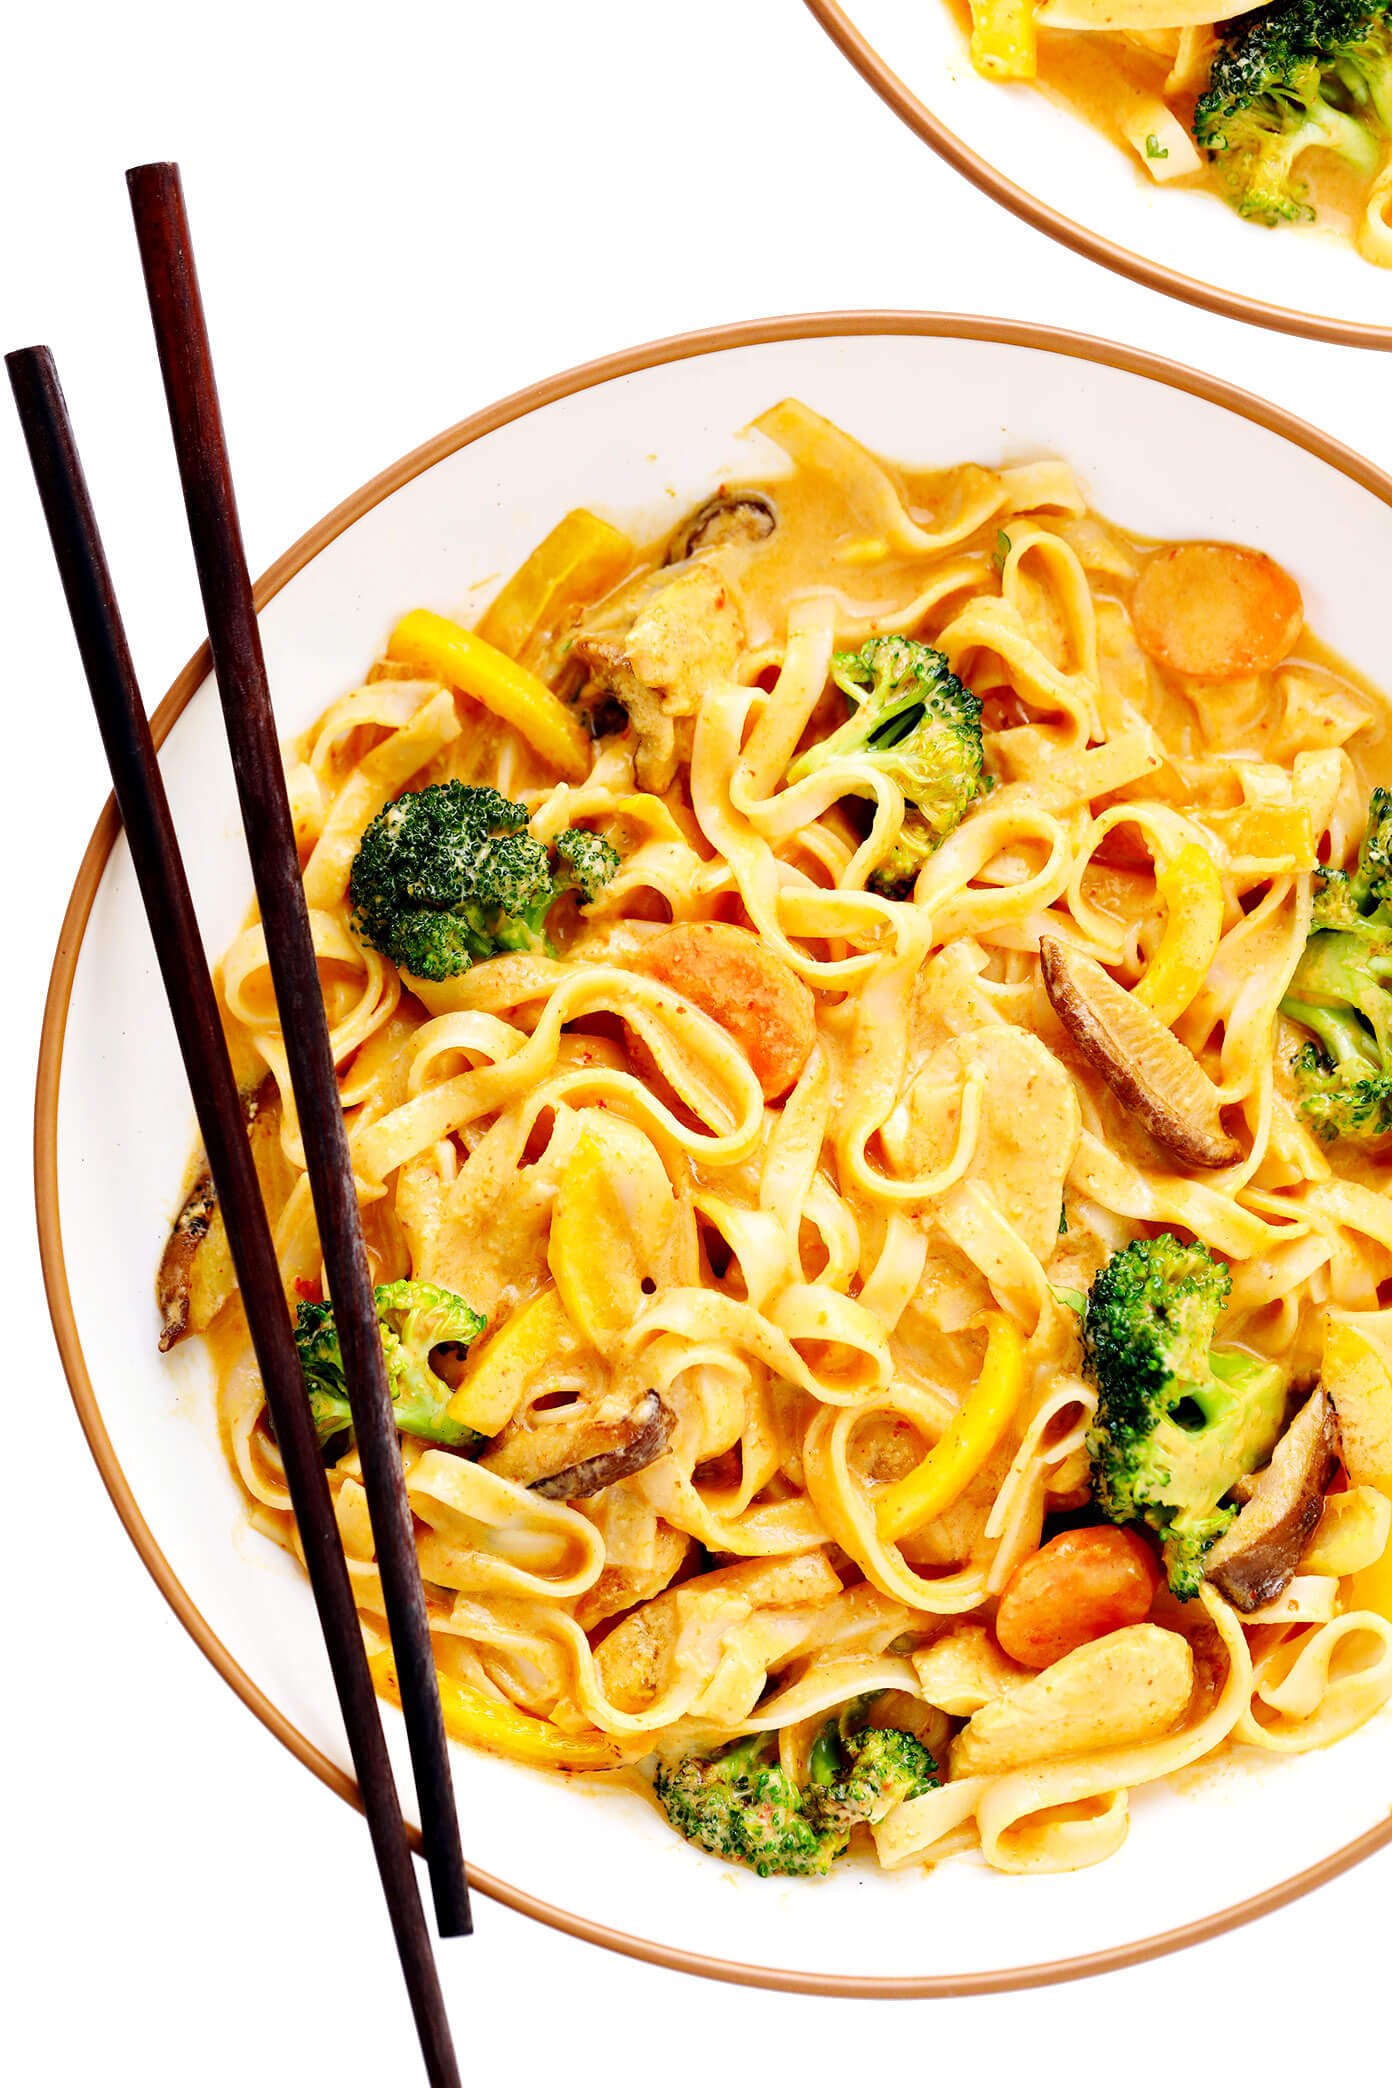 Saucy Thai Curried Peanut Noodles in Bowl with Chicken